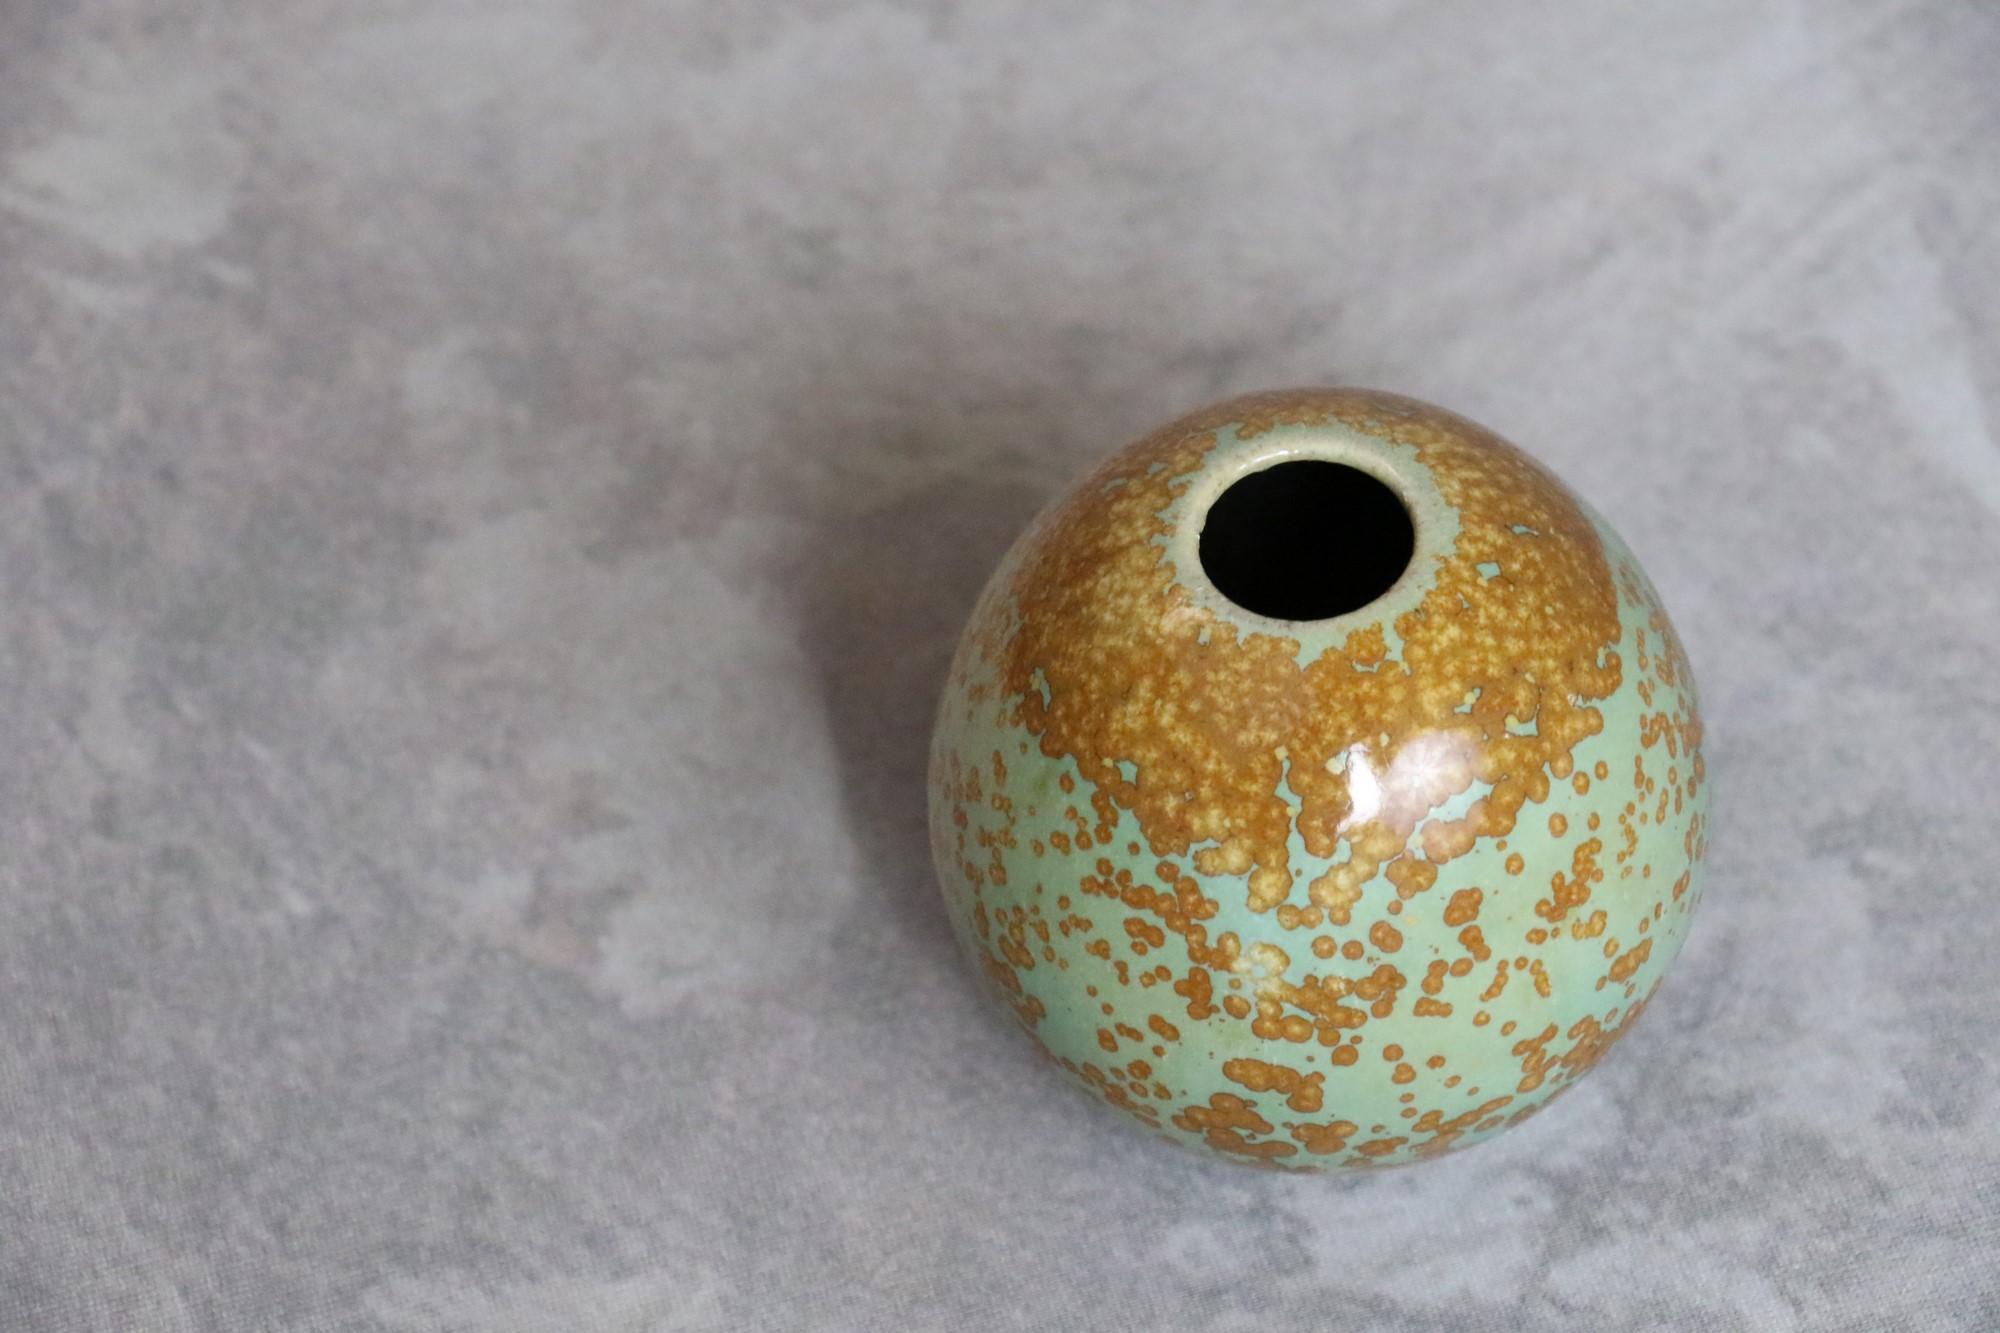 French Ceramic Ball Vase with Nucleations by Monique Cavallini - circa 2000 For Sale 1